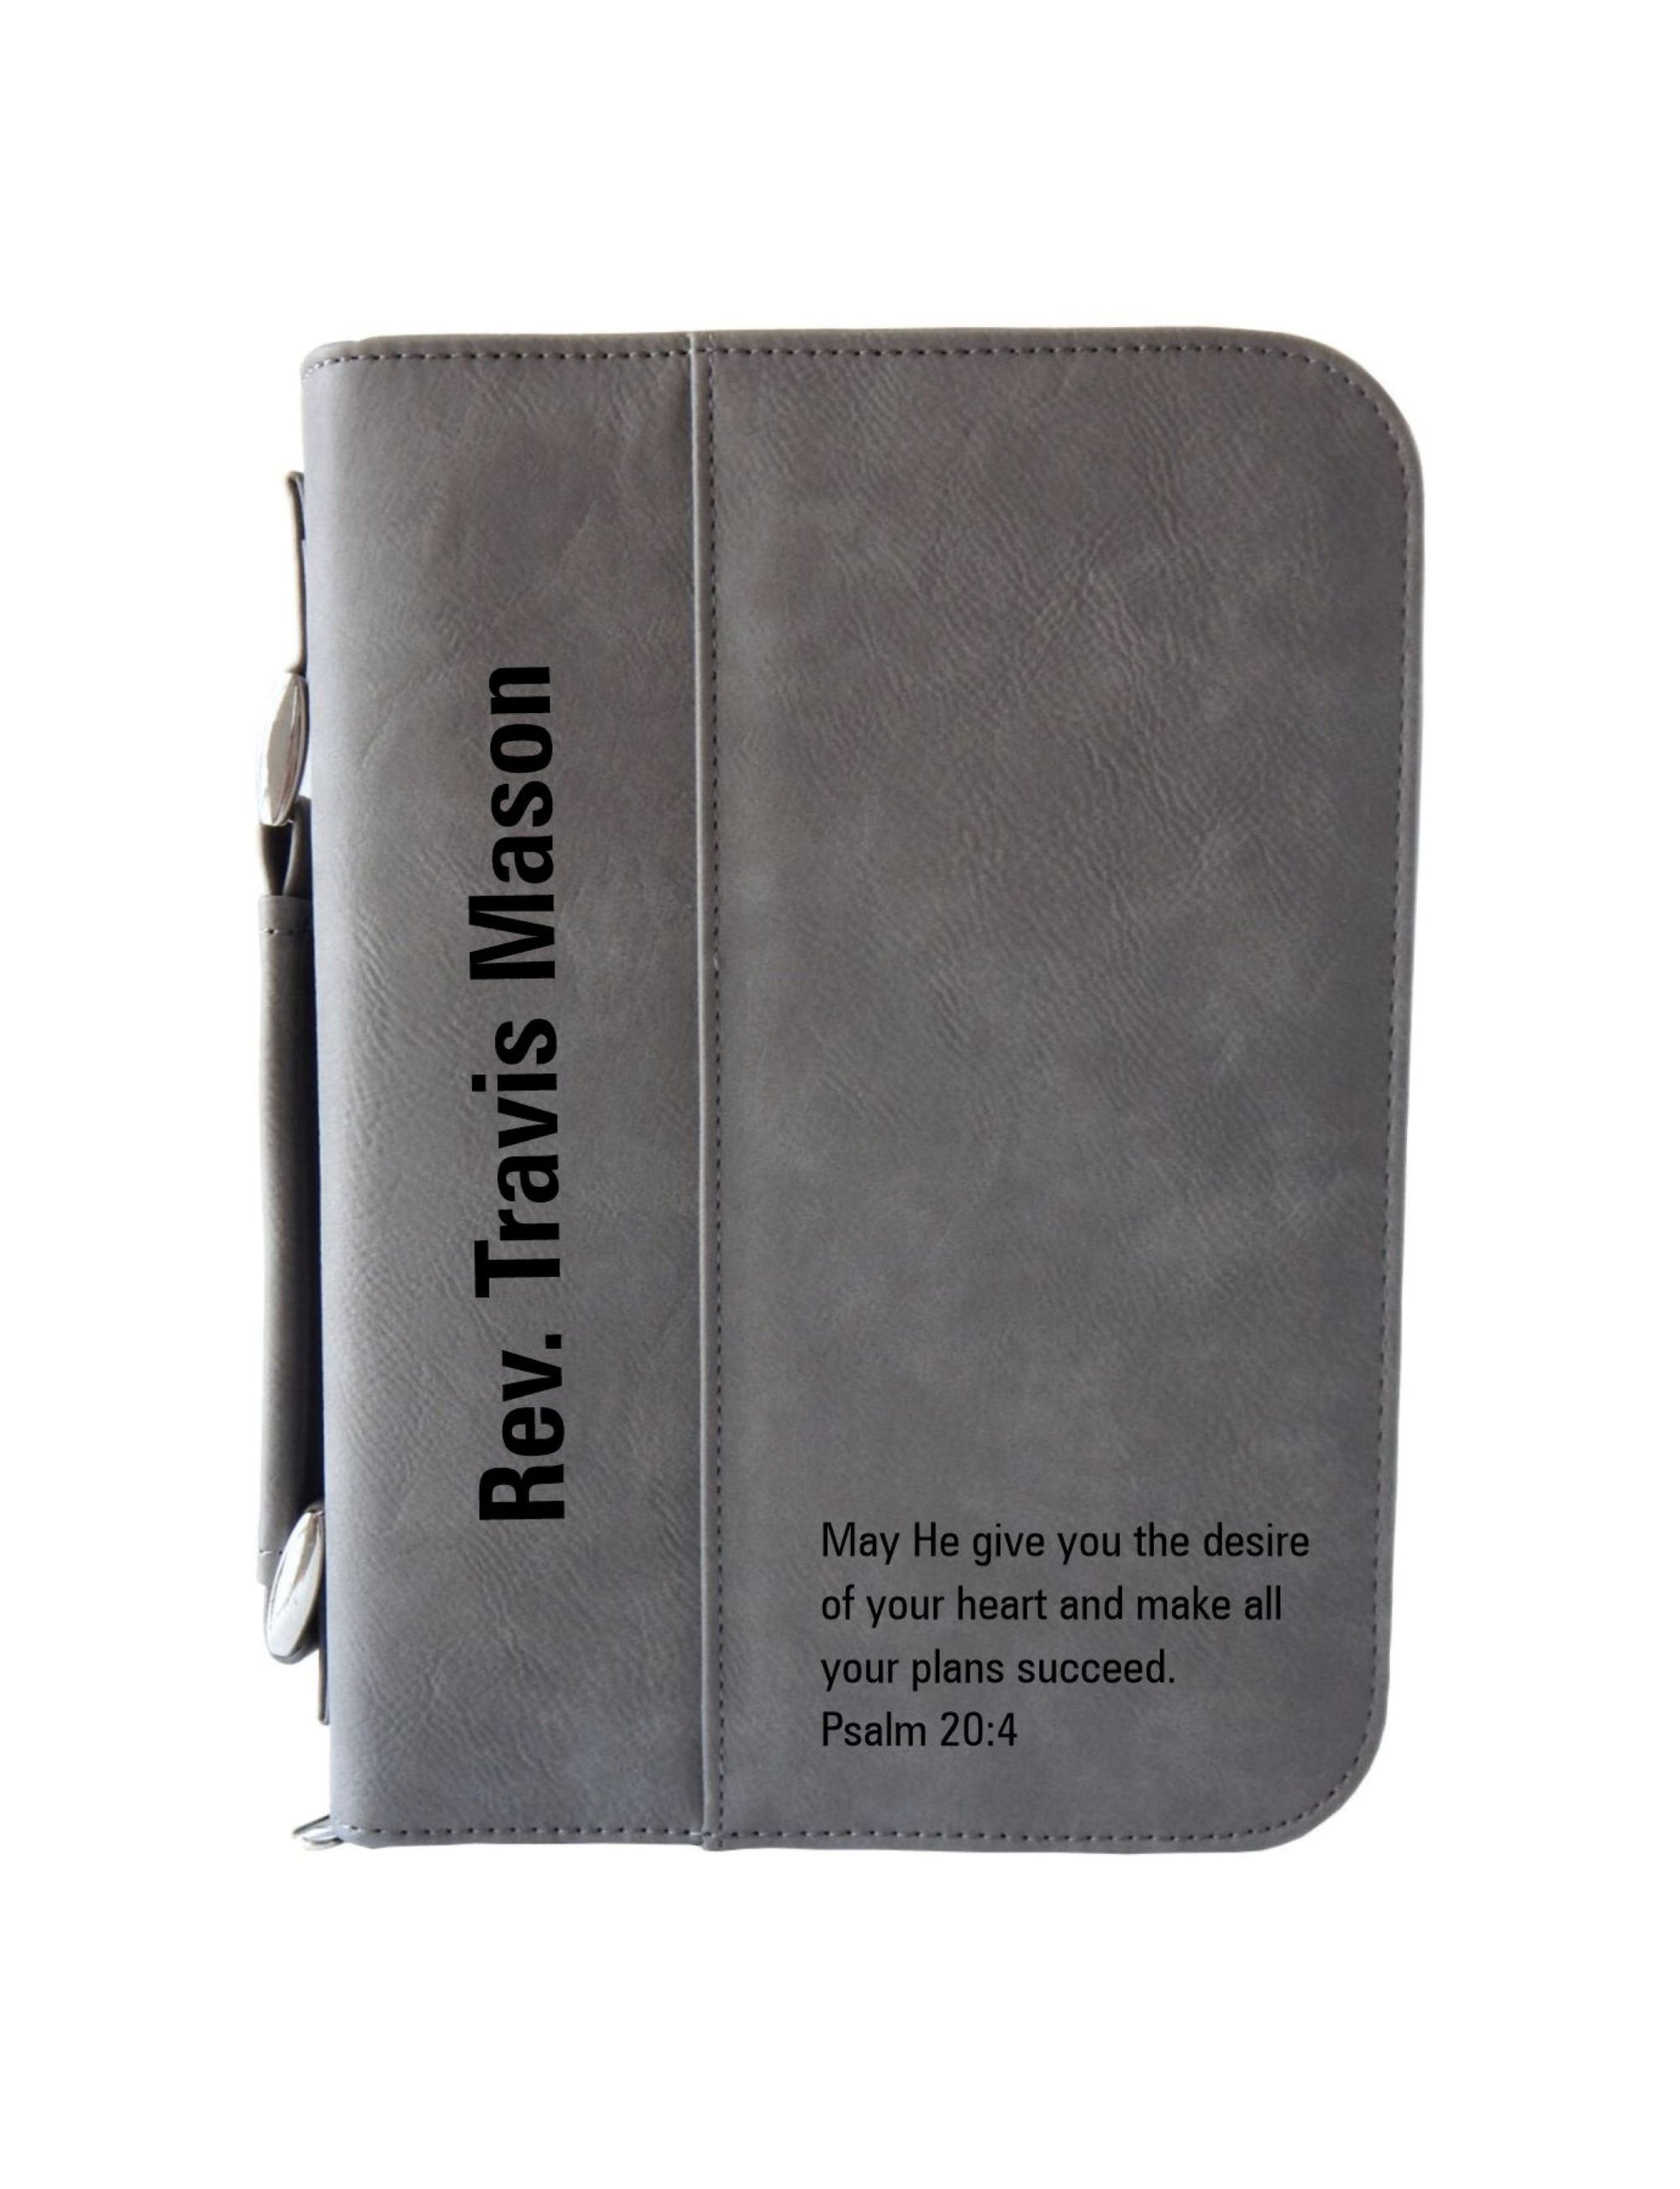 Officiant Wedding Gift for Pastor | Leather Bible Cover with Zipper and Handle